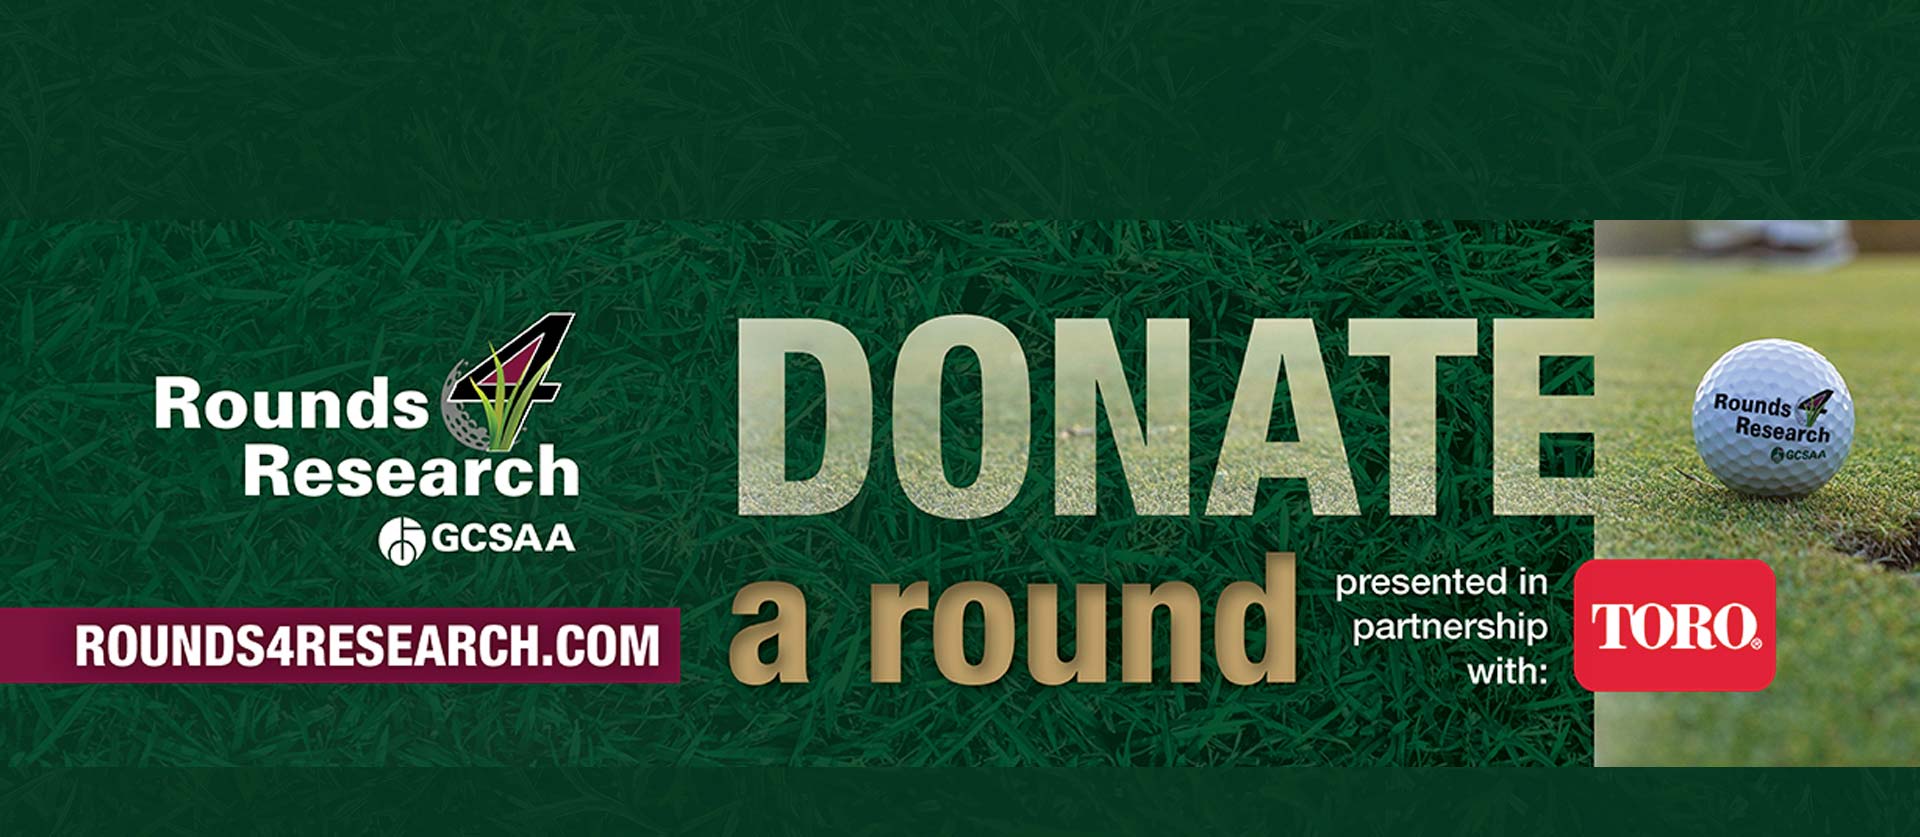 Rounds Research GCSAA - Donate a Round banner presented in partnership with Toro